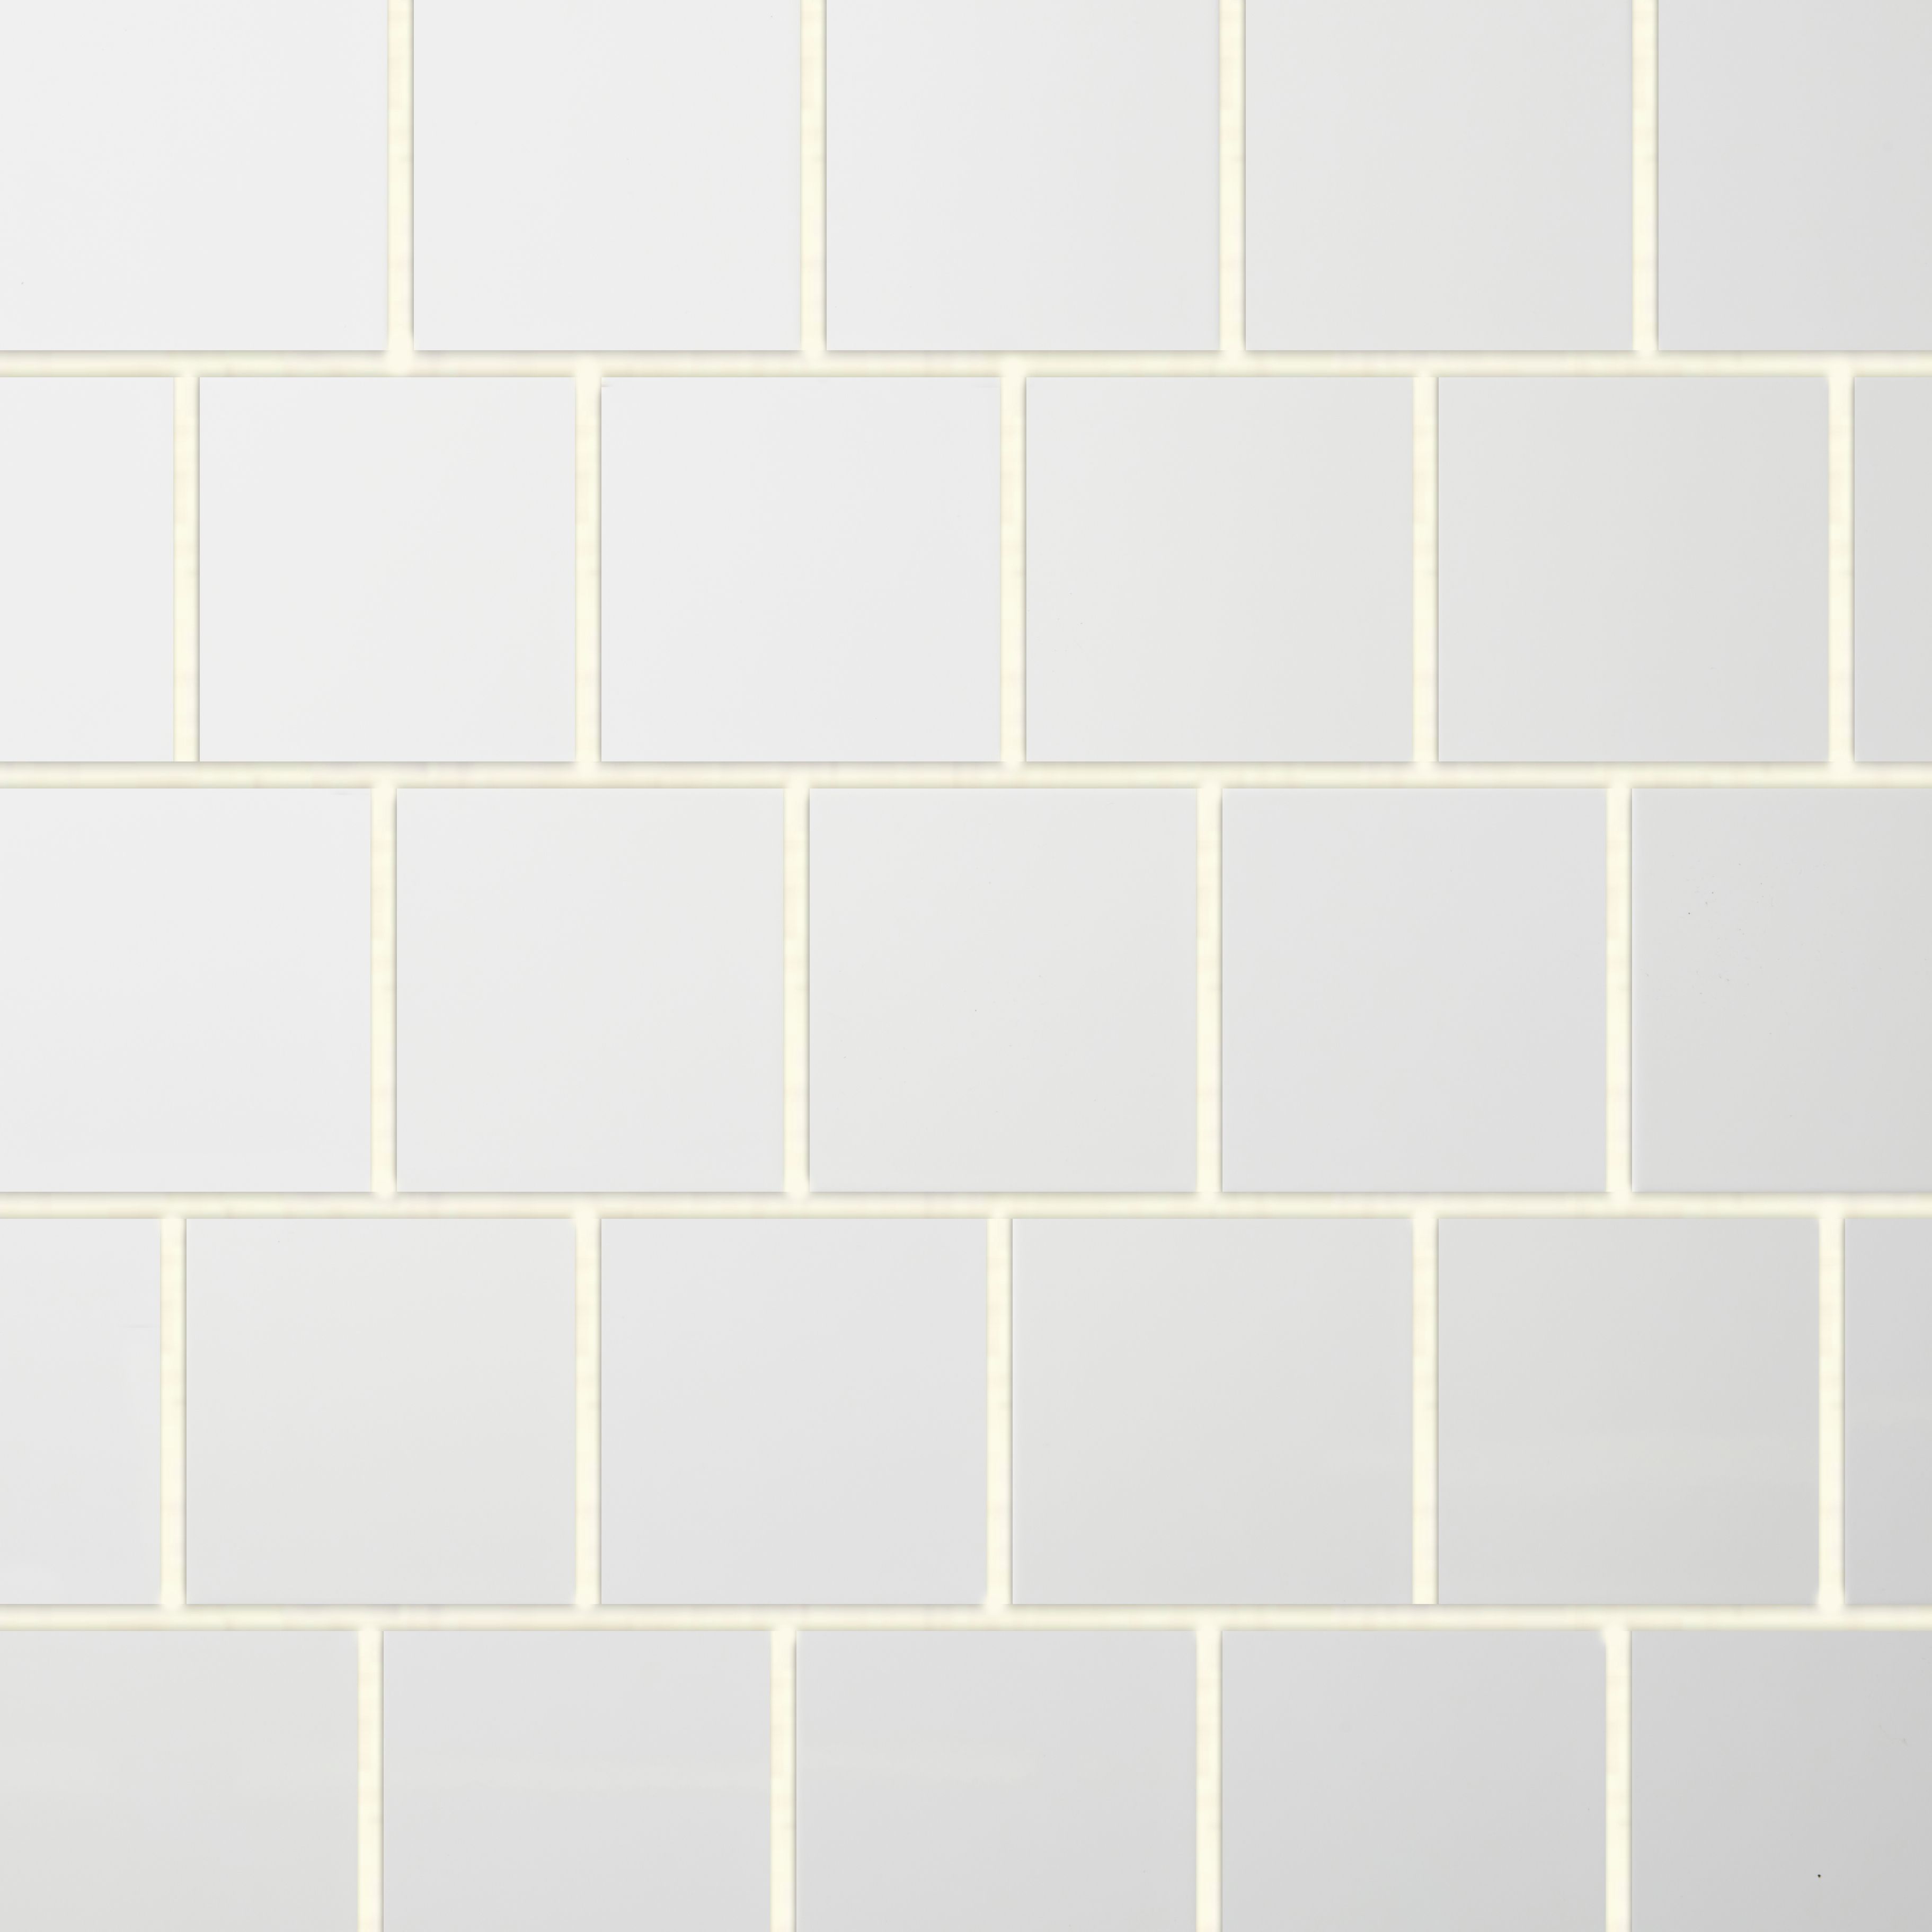 Leccia White Gloss Ceramic Indoor Wall Tile, (L)150mm (W)150mm